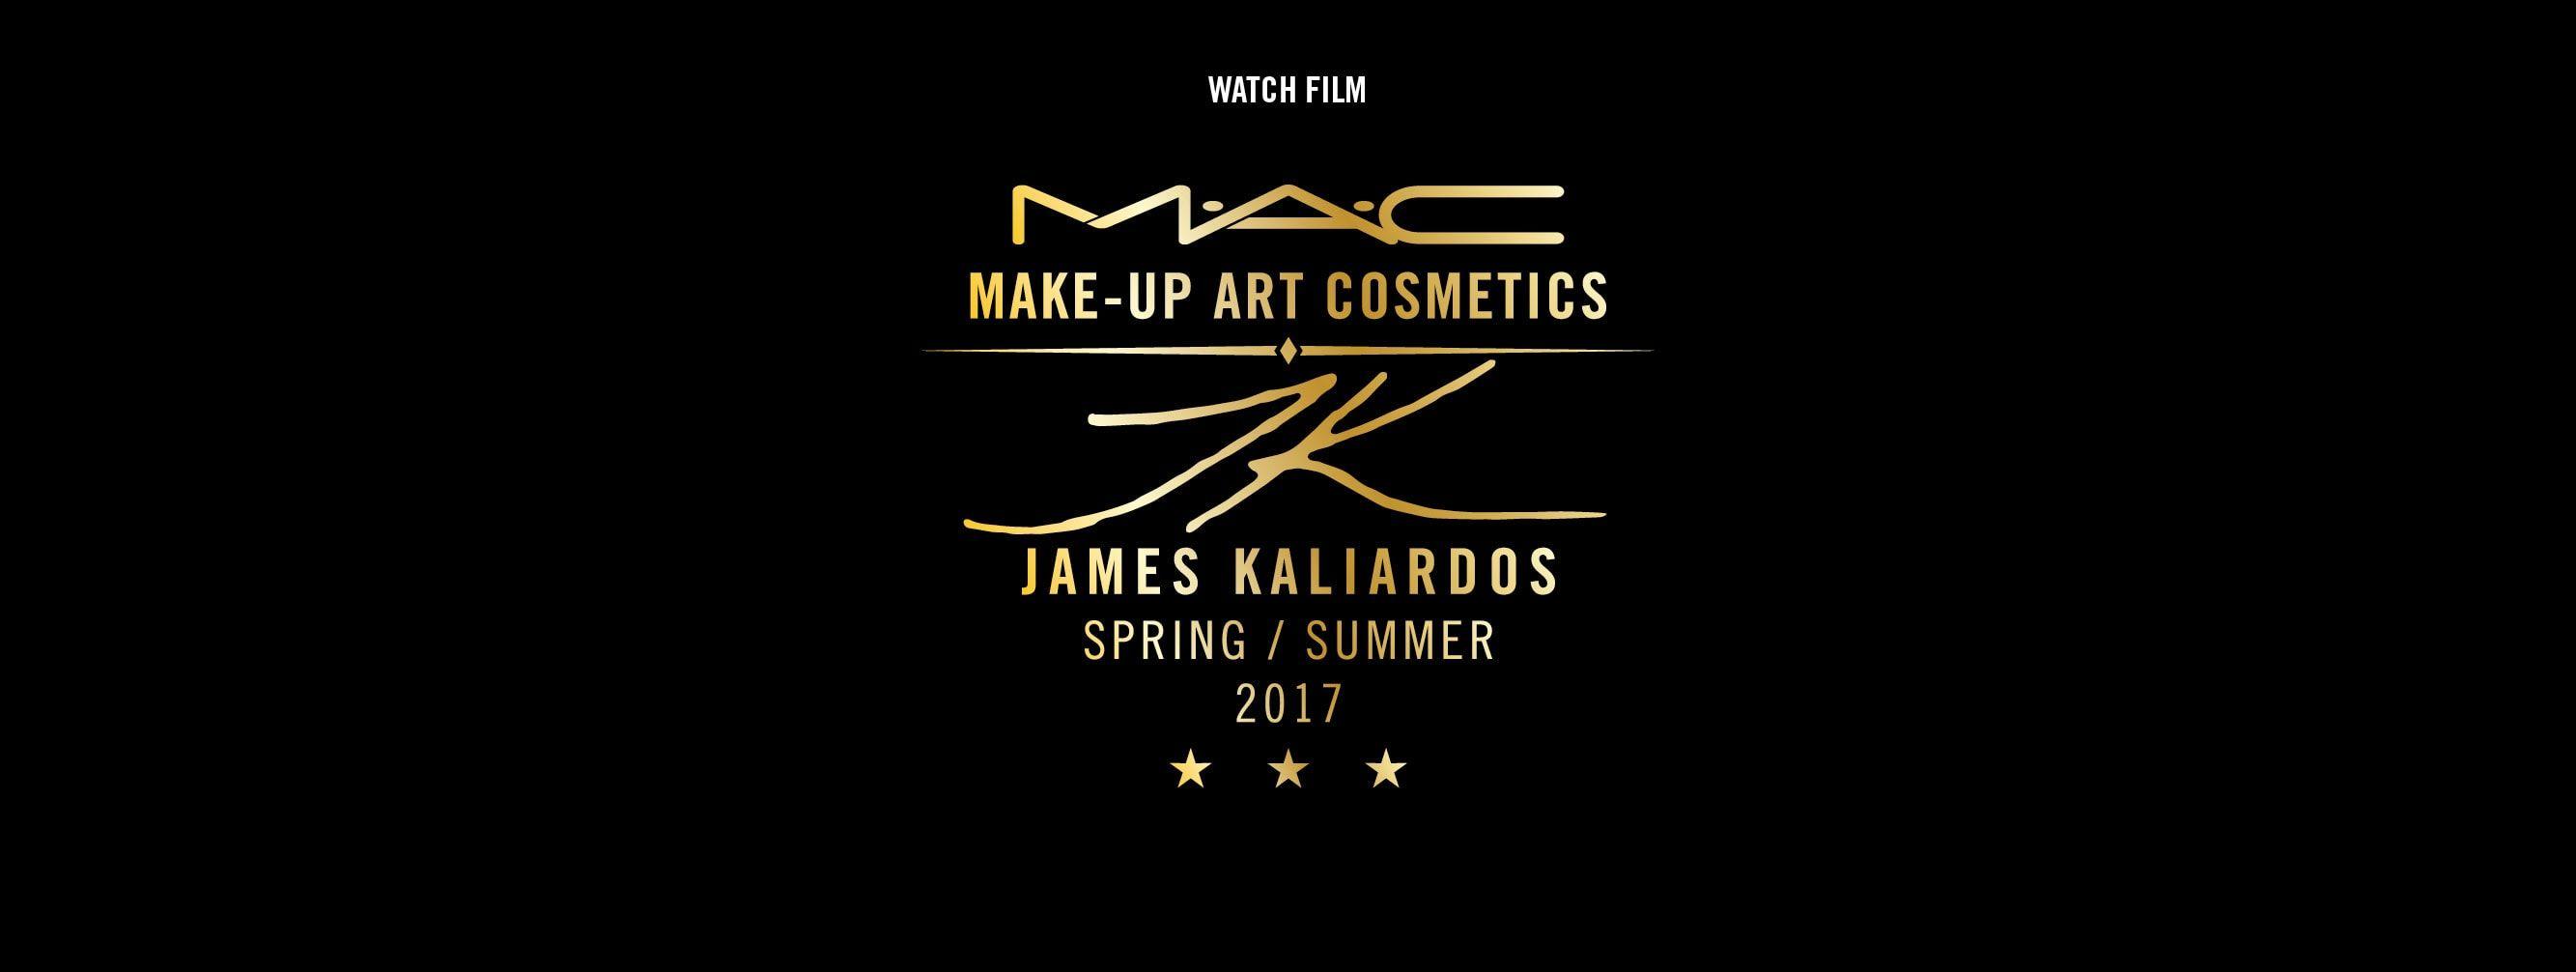 Make Up Art Cosmetics Logo - Make-Up Art Cosmetics Collection Page | MAC Cosmetics - Official Site